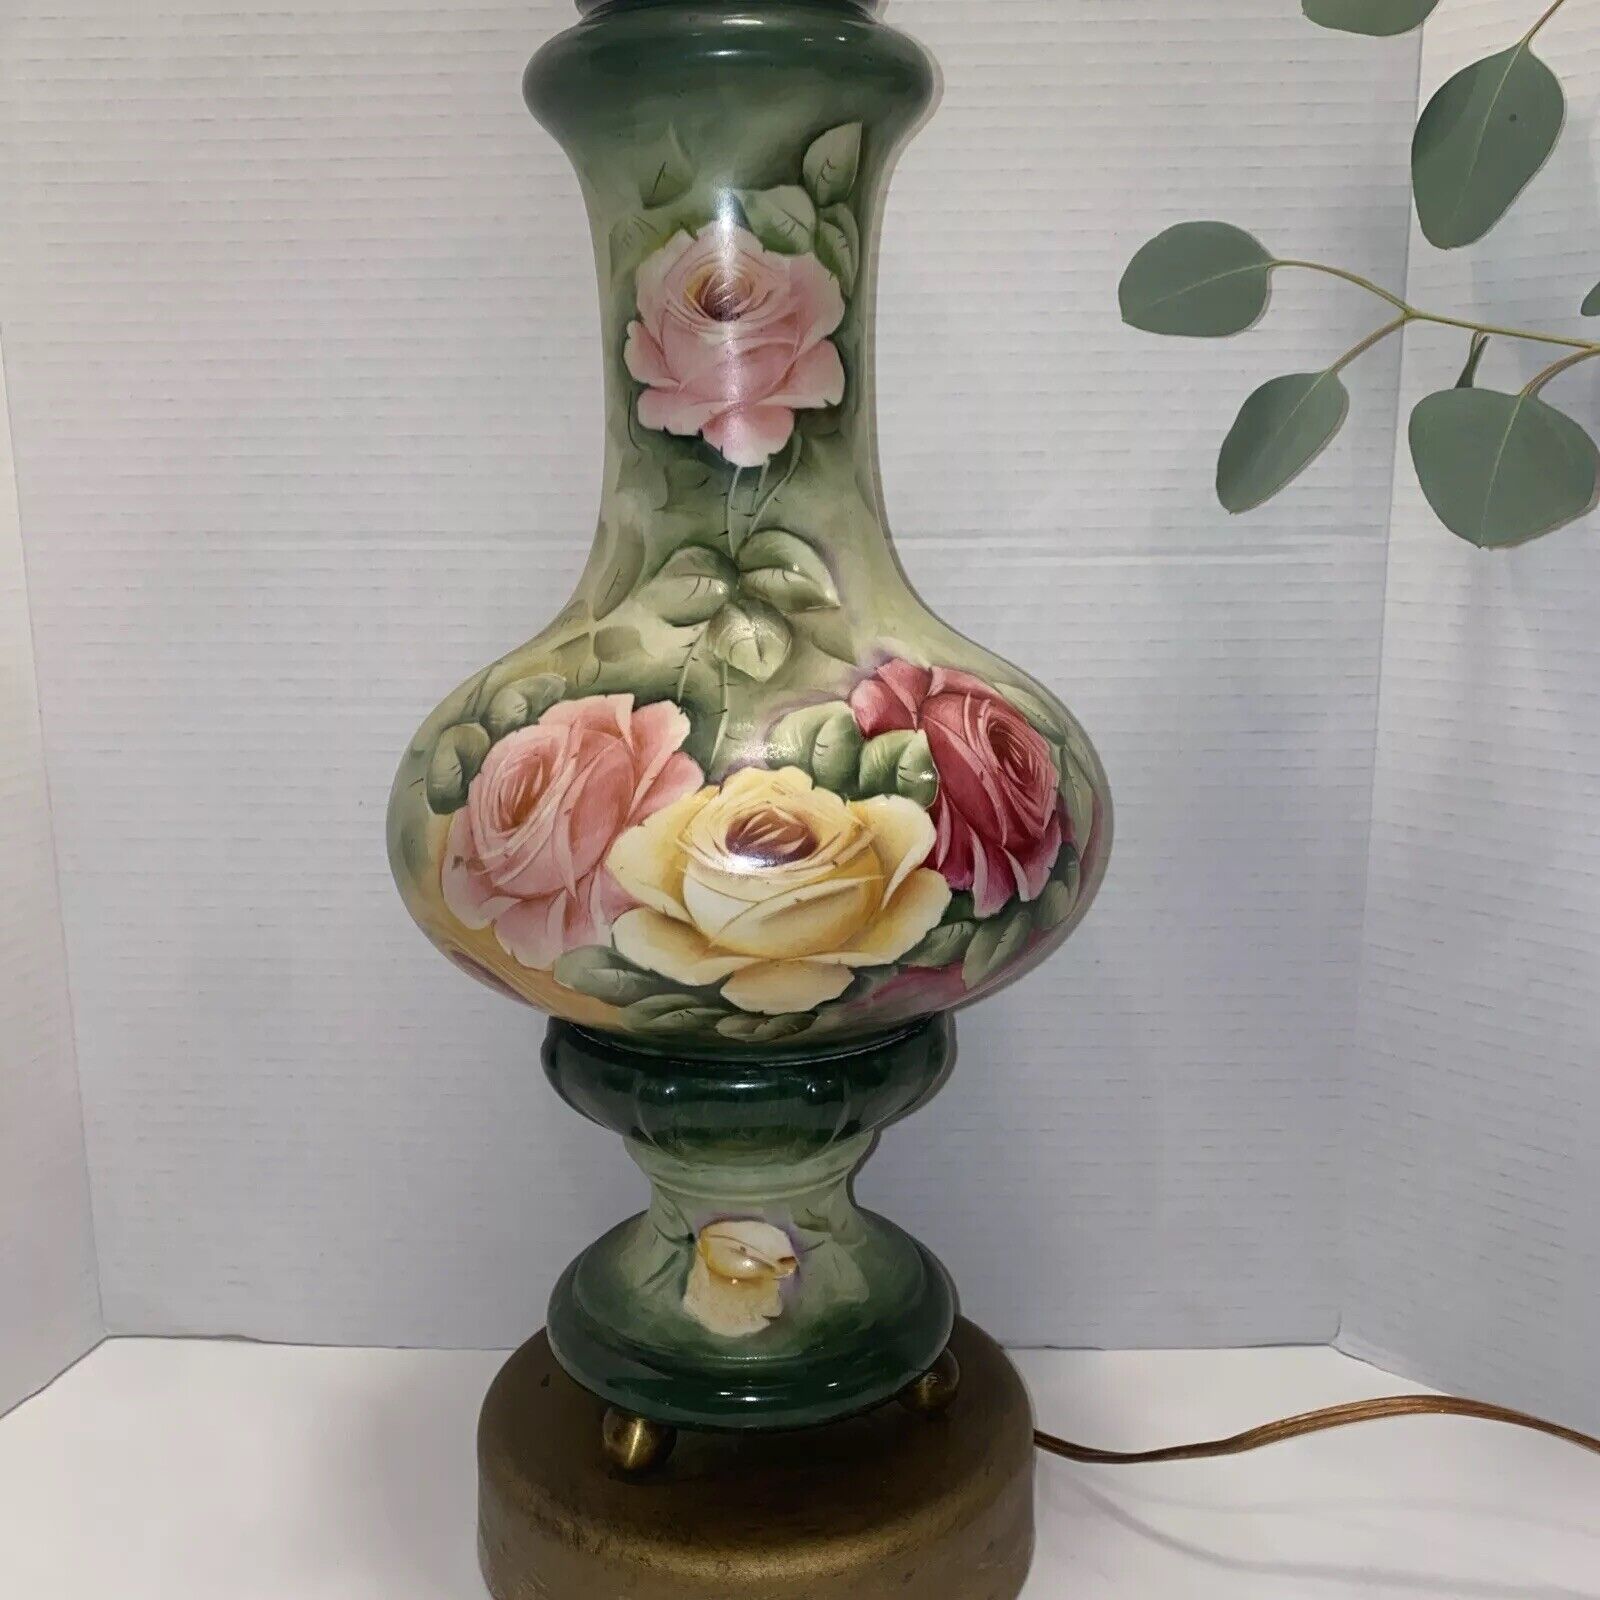 Hollywood Regency Floral Table Lamp Hand Painted Roses Circa 50-60s Ceramic 3way